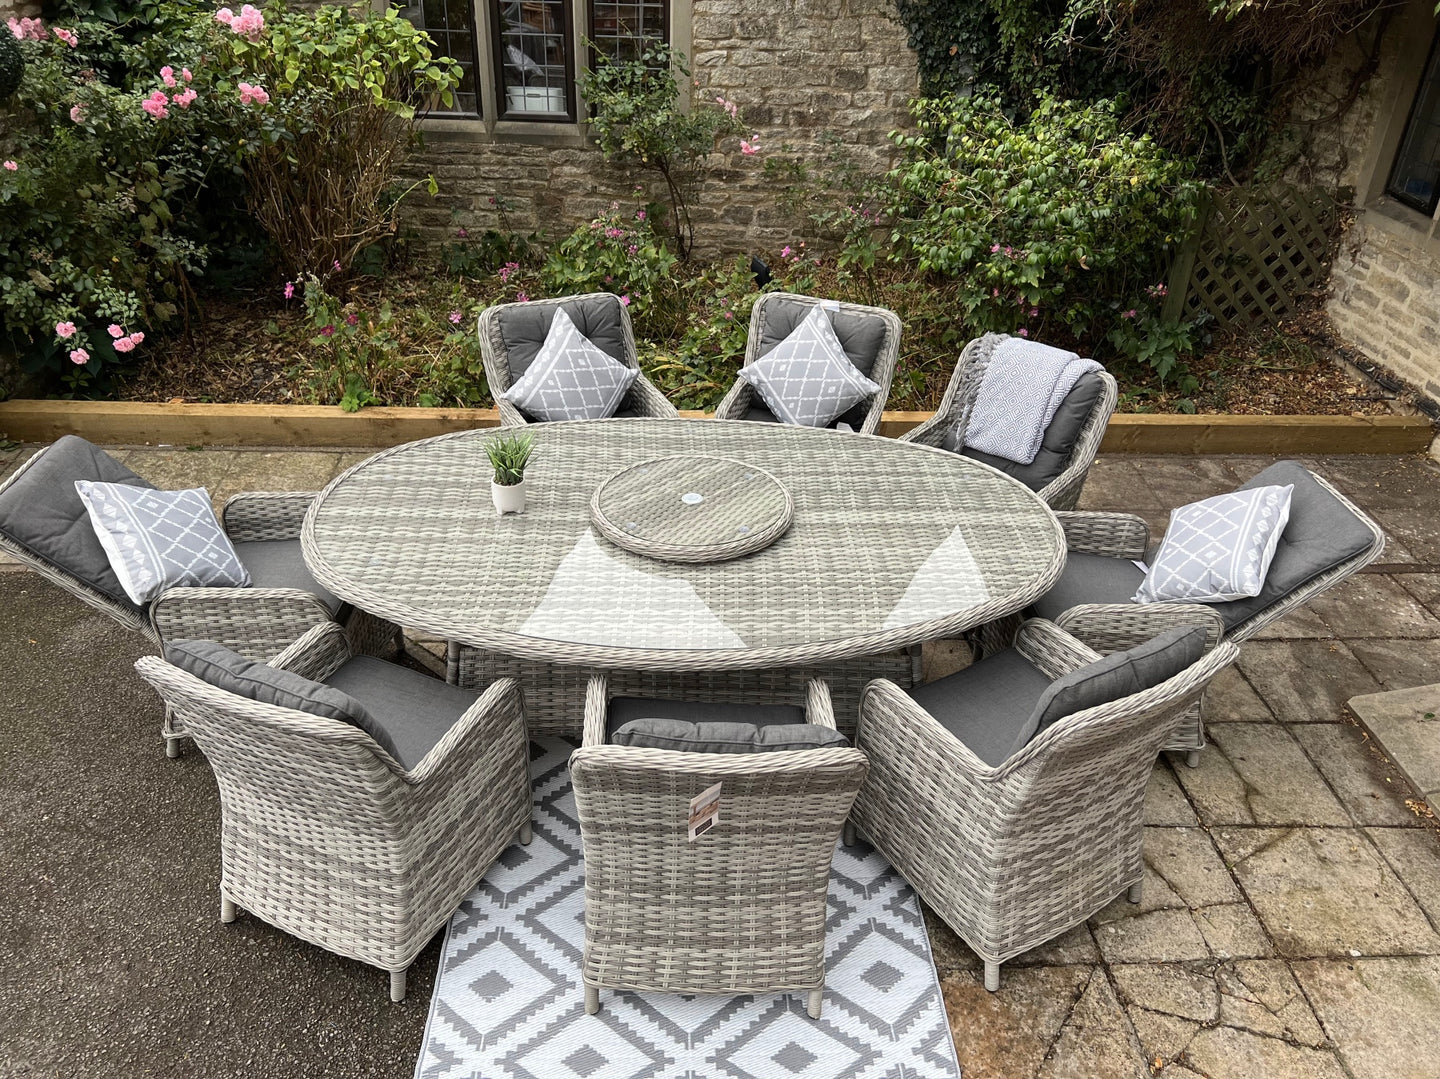 RATTAN GARDEN FURNITURE DINING TABLE OVAL WITH RECLINE CHAIRS